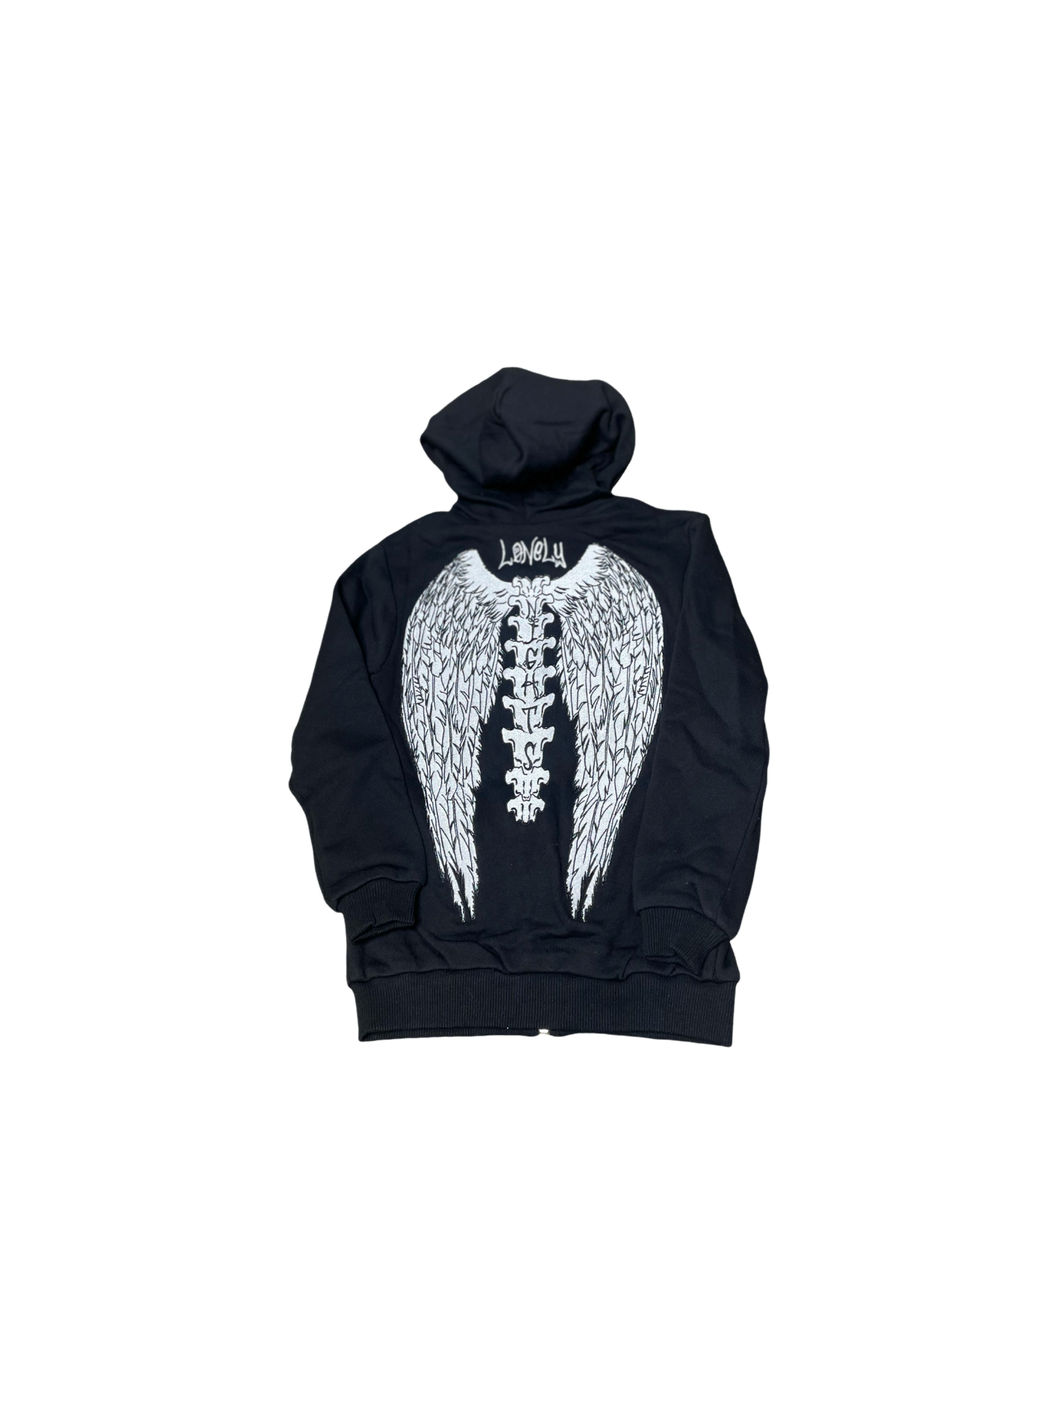 Lonelynights Kids black and White sweatsuit